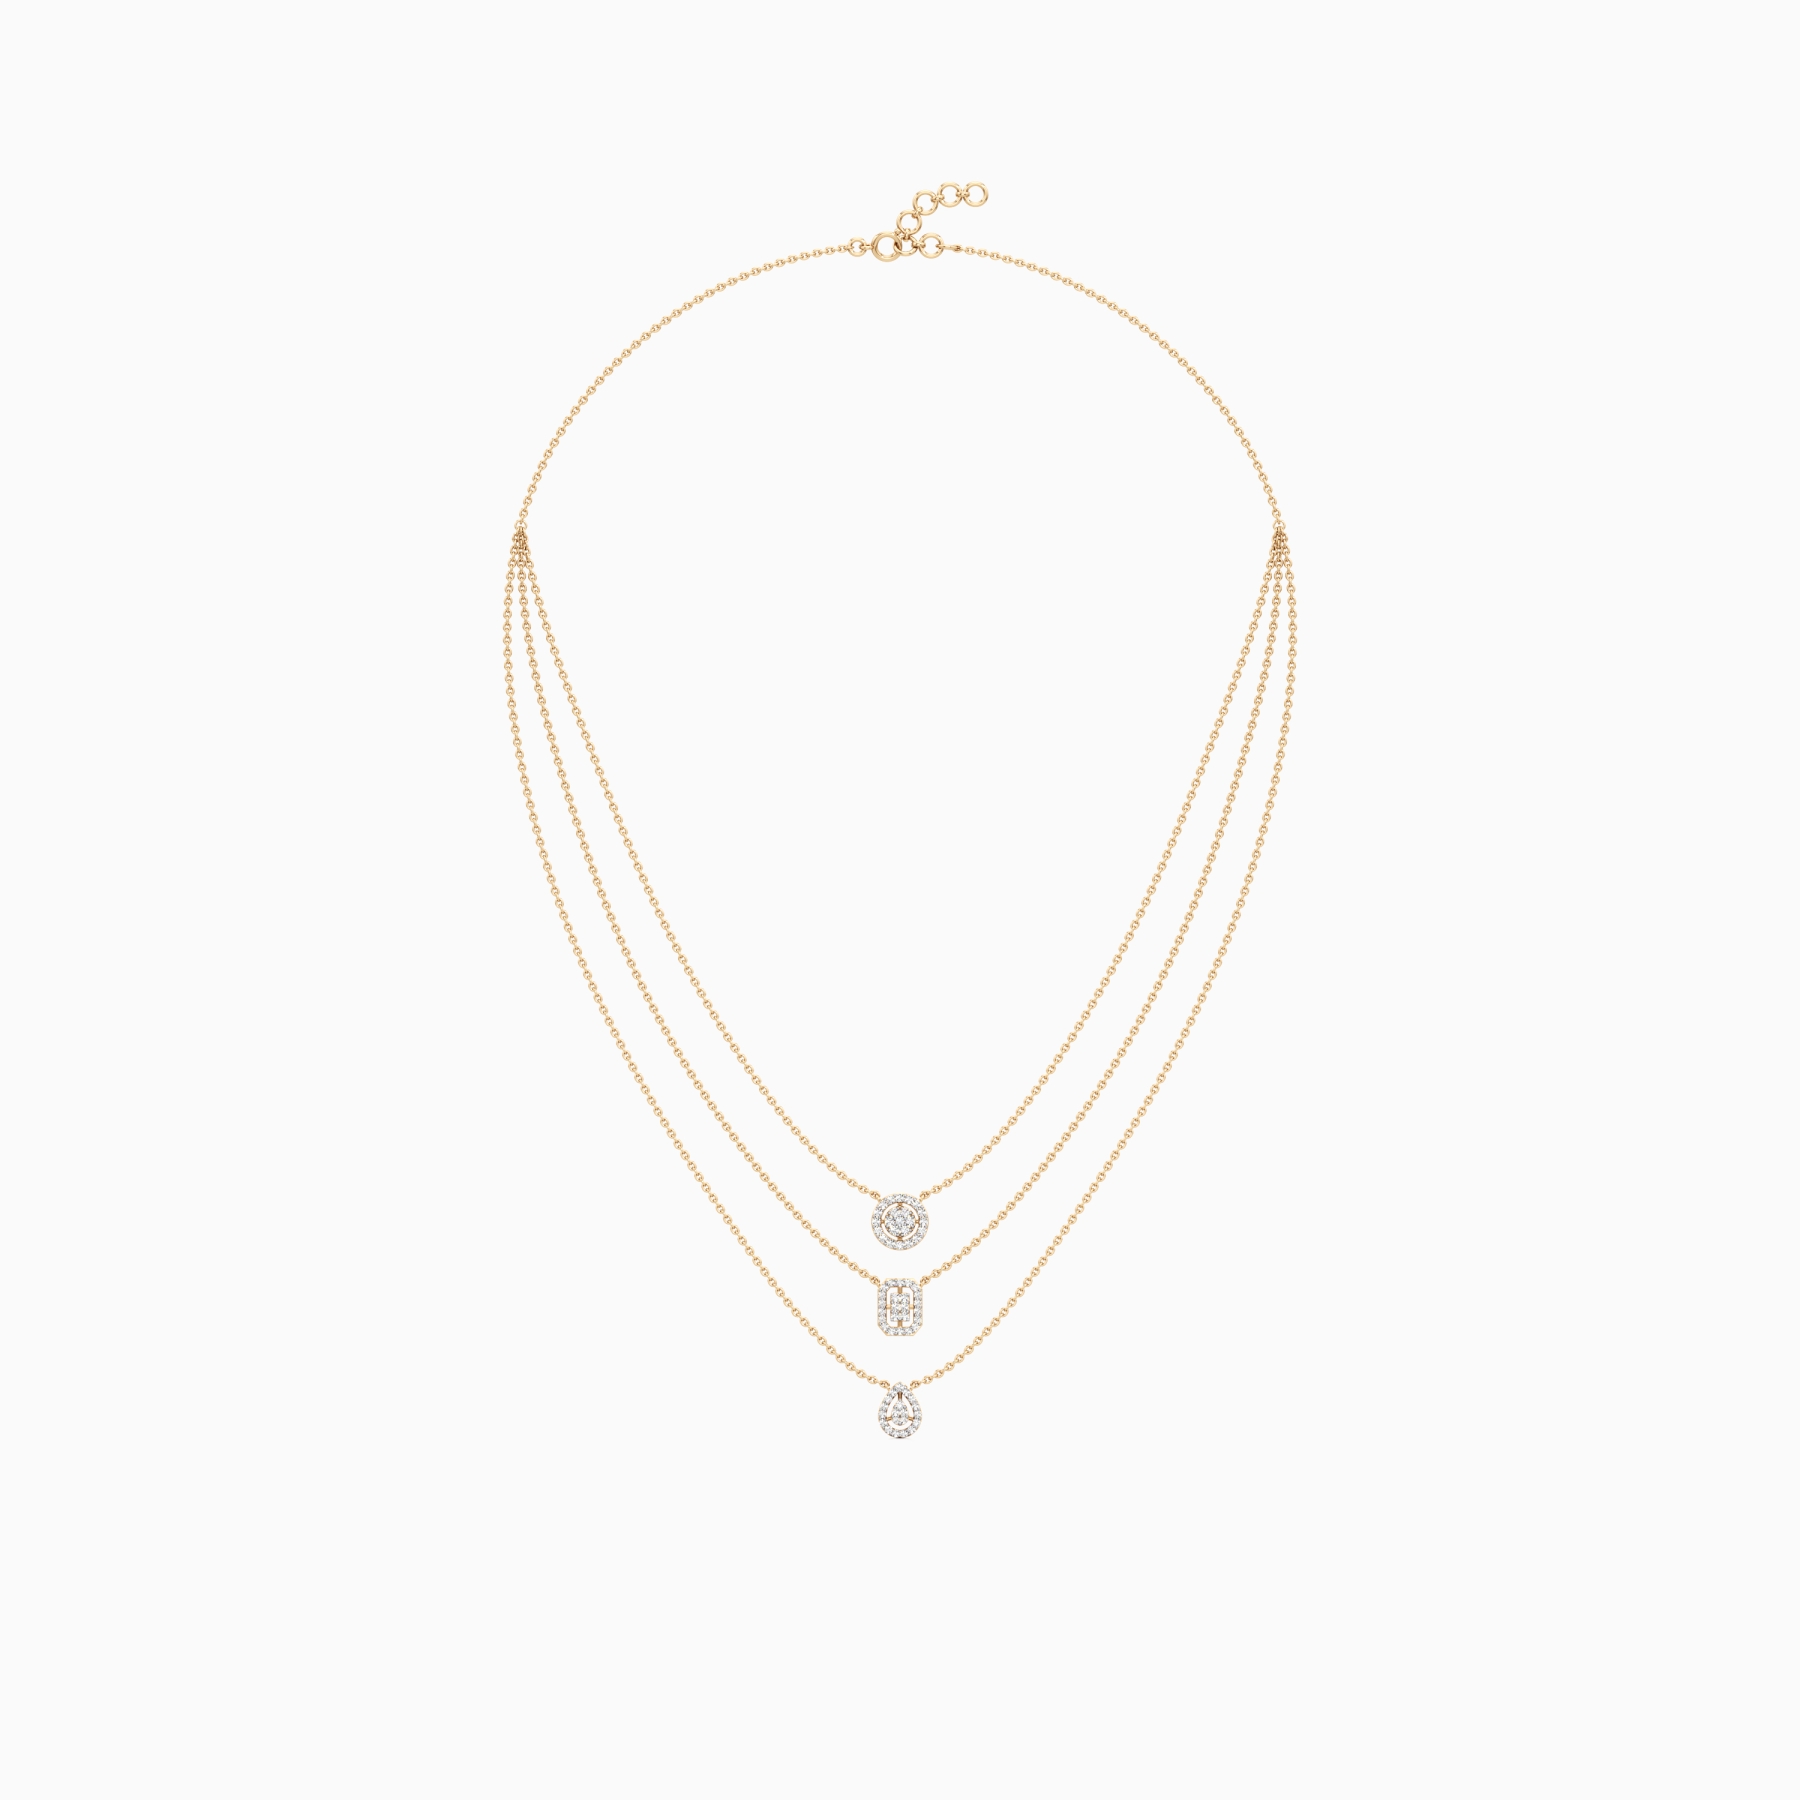 Multi-layered Trio Shaped Pave Chain in Yellow 14k Gold